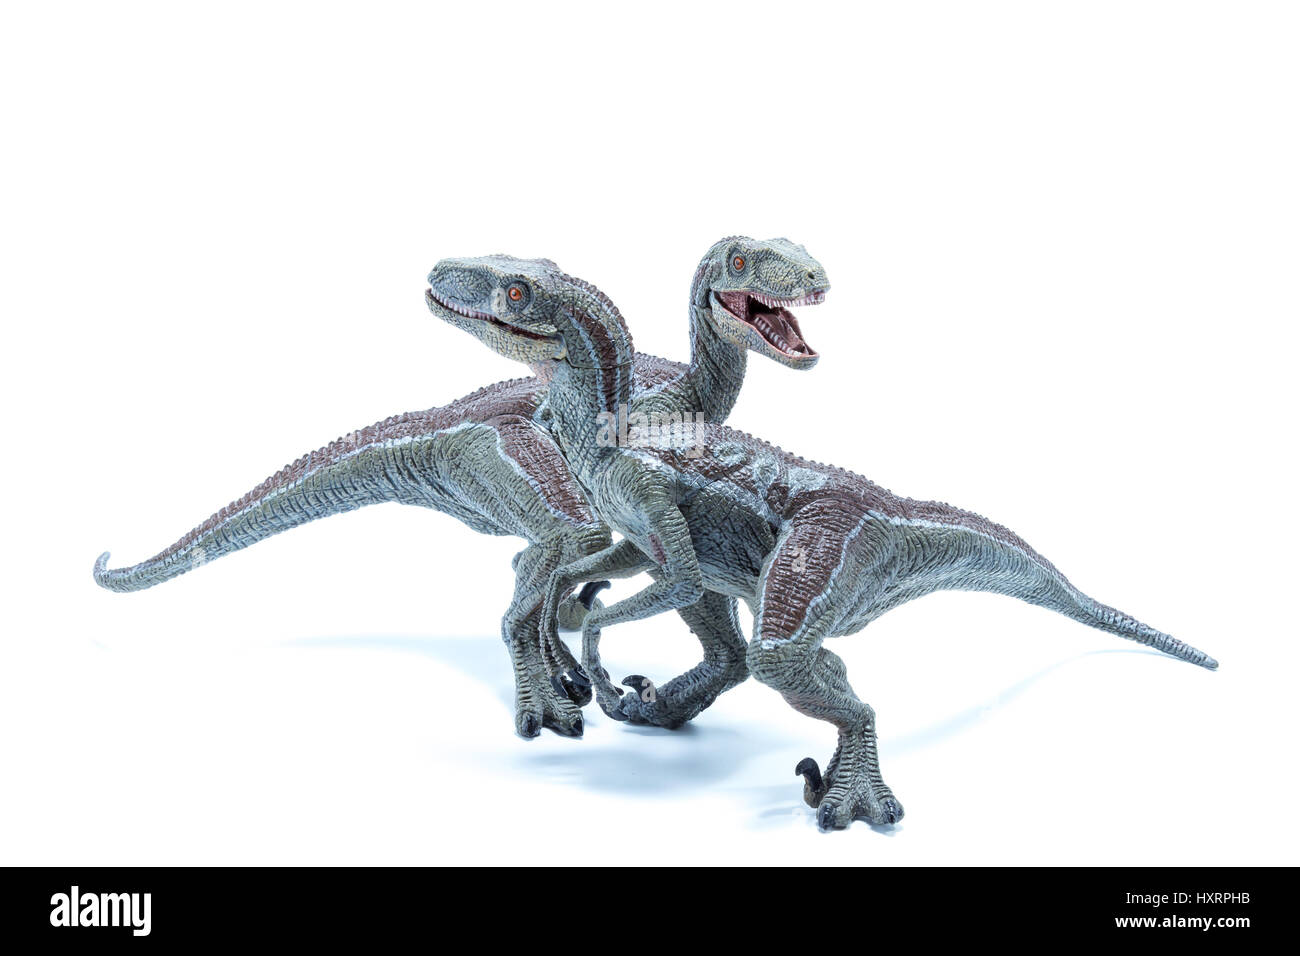 Two great Velociraptor dinosaurs toy crossing each other isolated on white background - side view Stock Photo